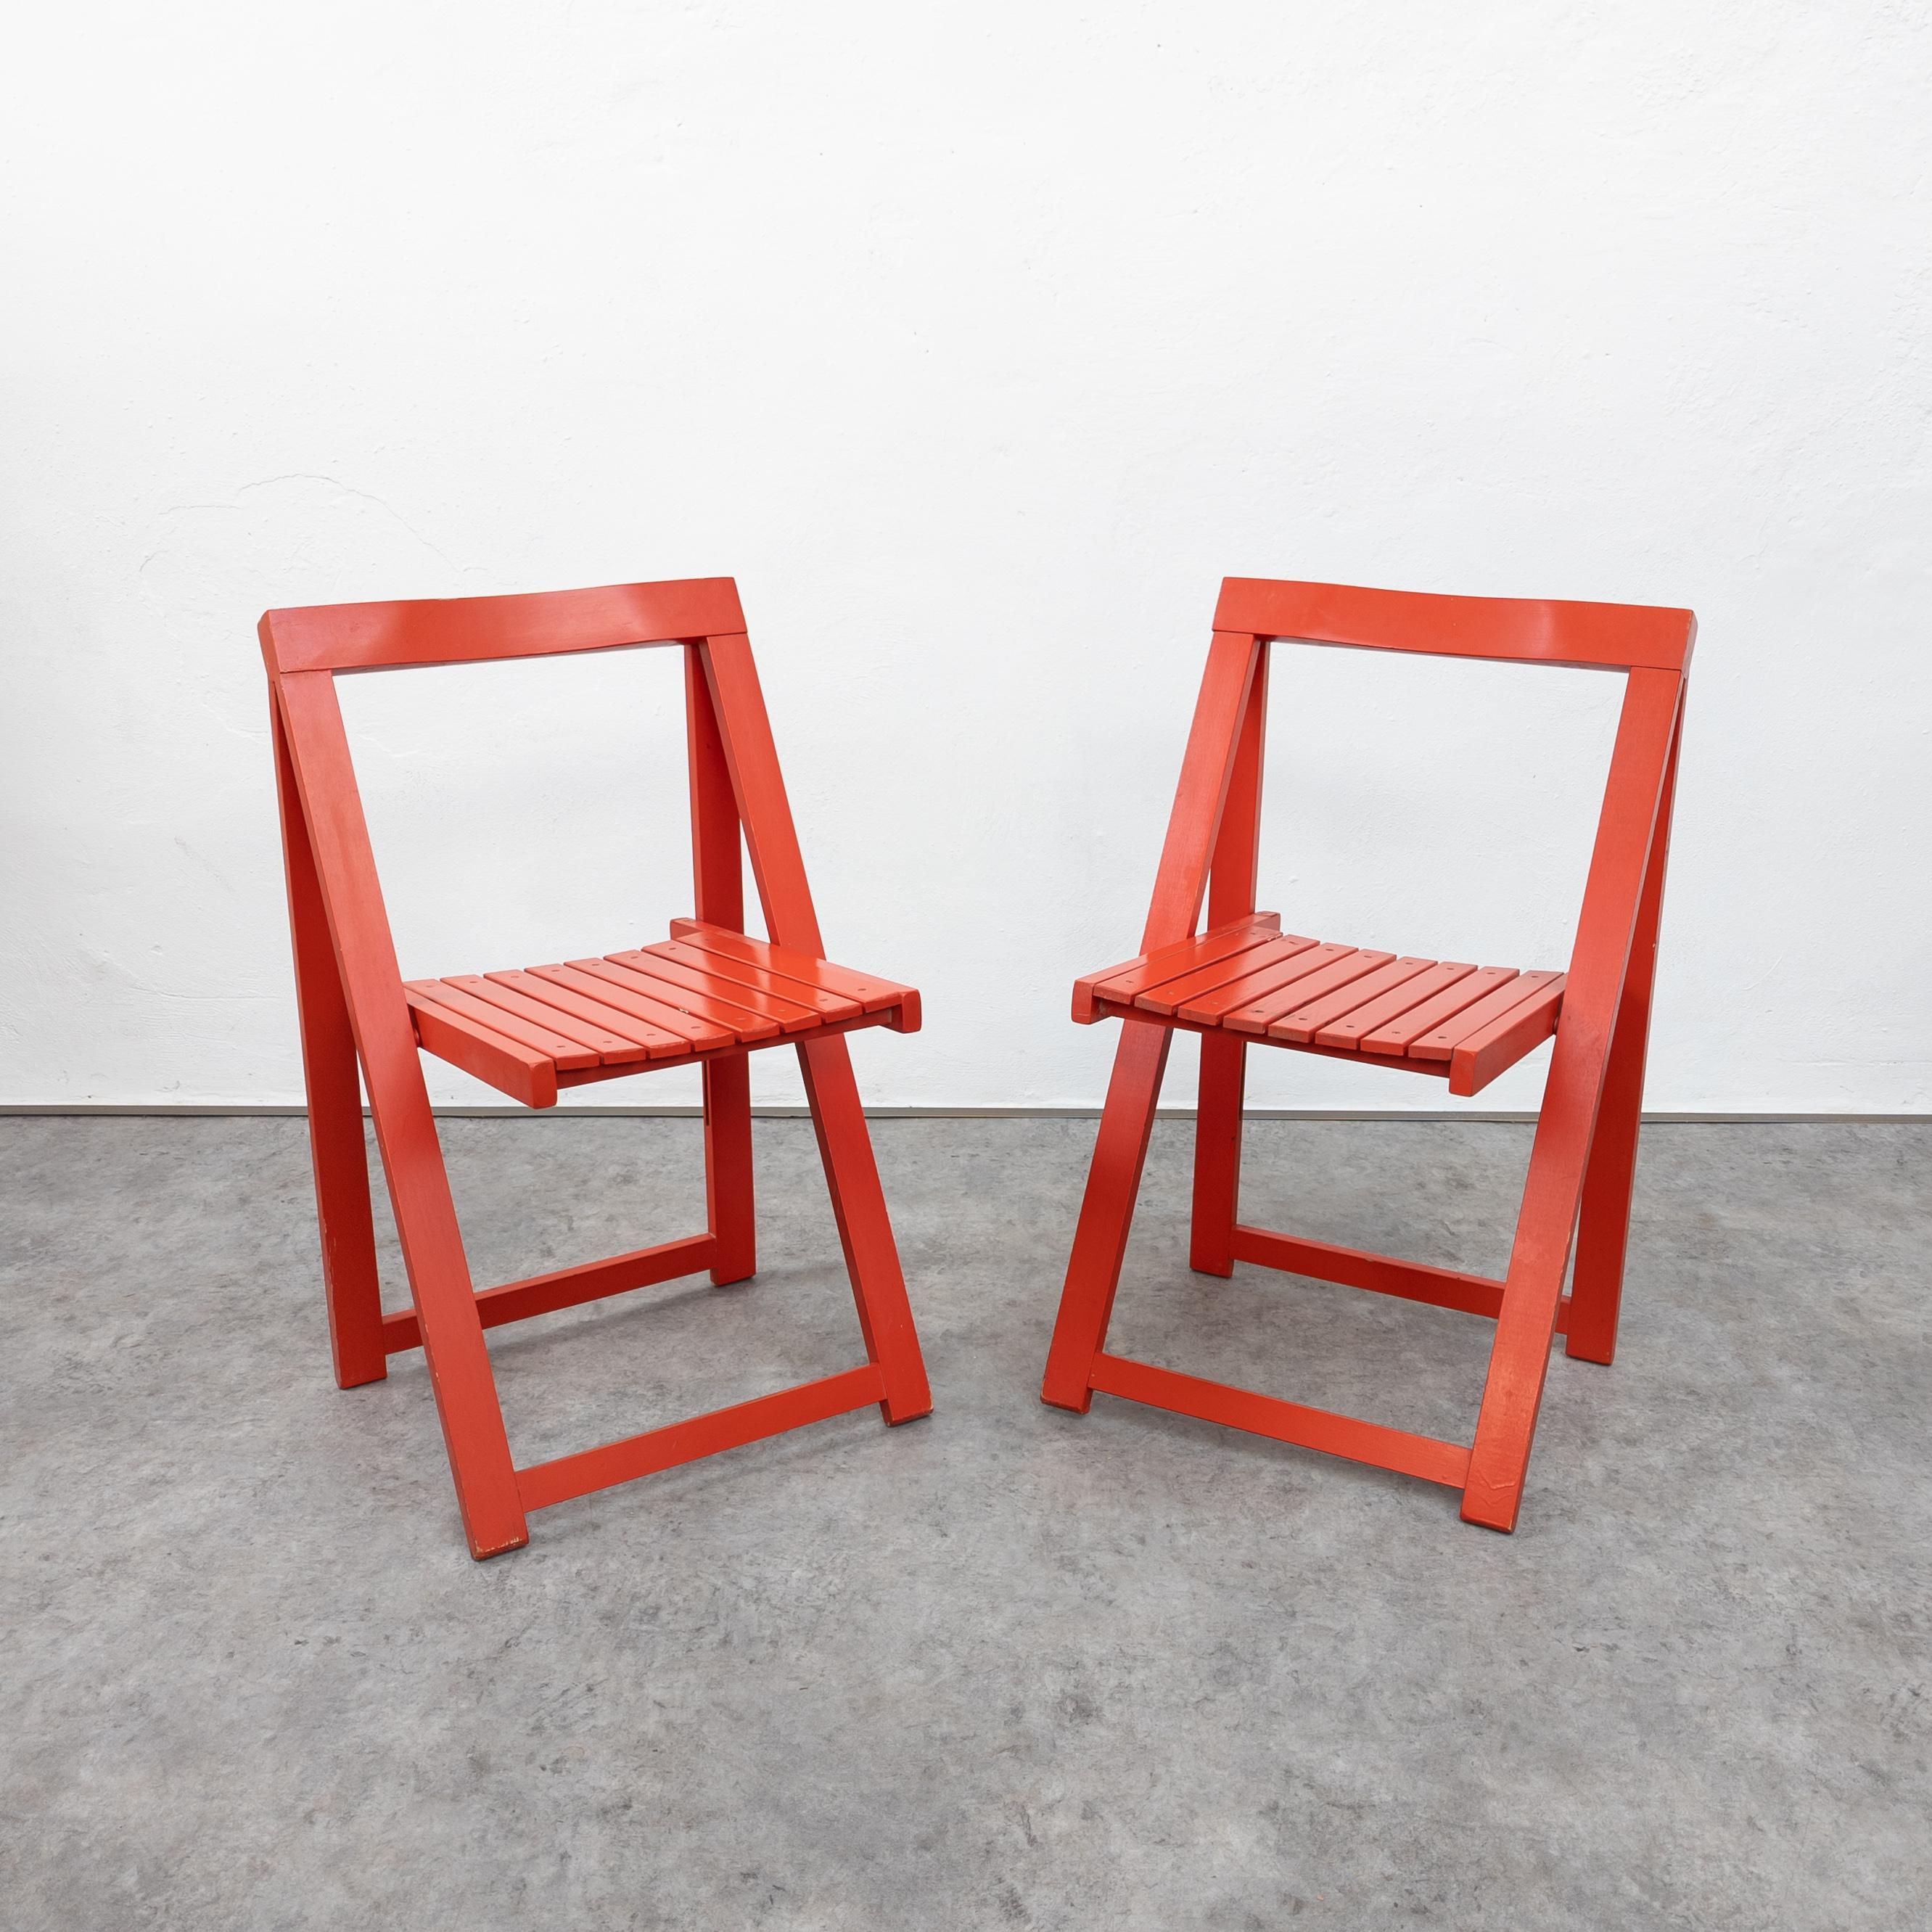 Italian Pair of Vintage Folding Chairs by Aldo Jacober for Alberto Bazzani For Sale